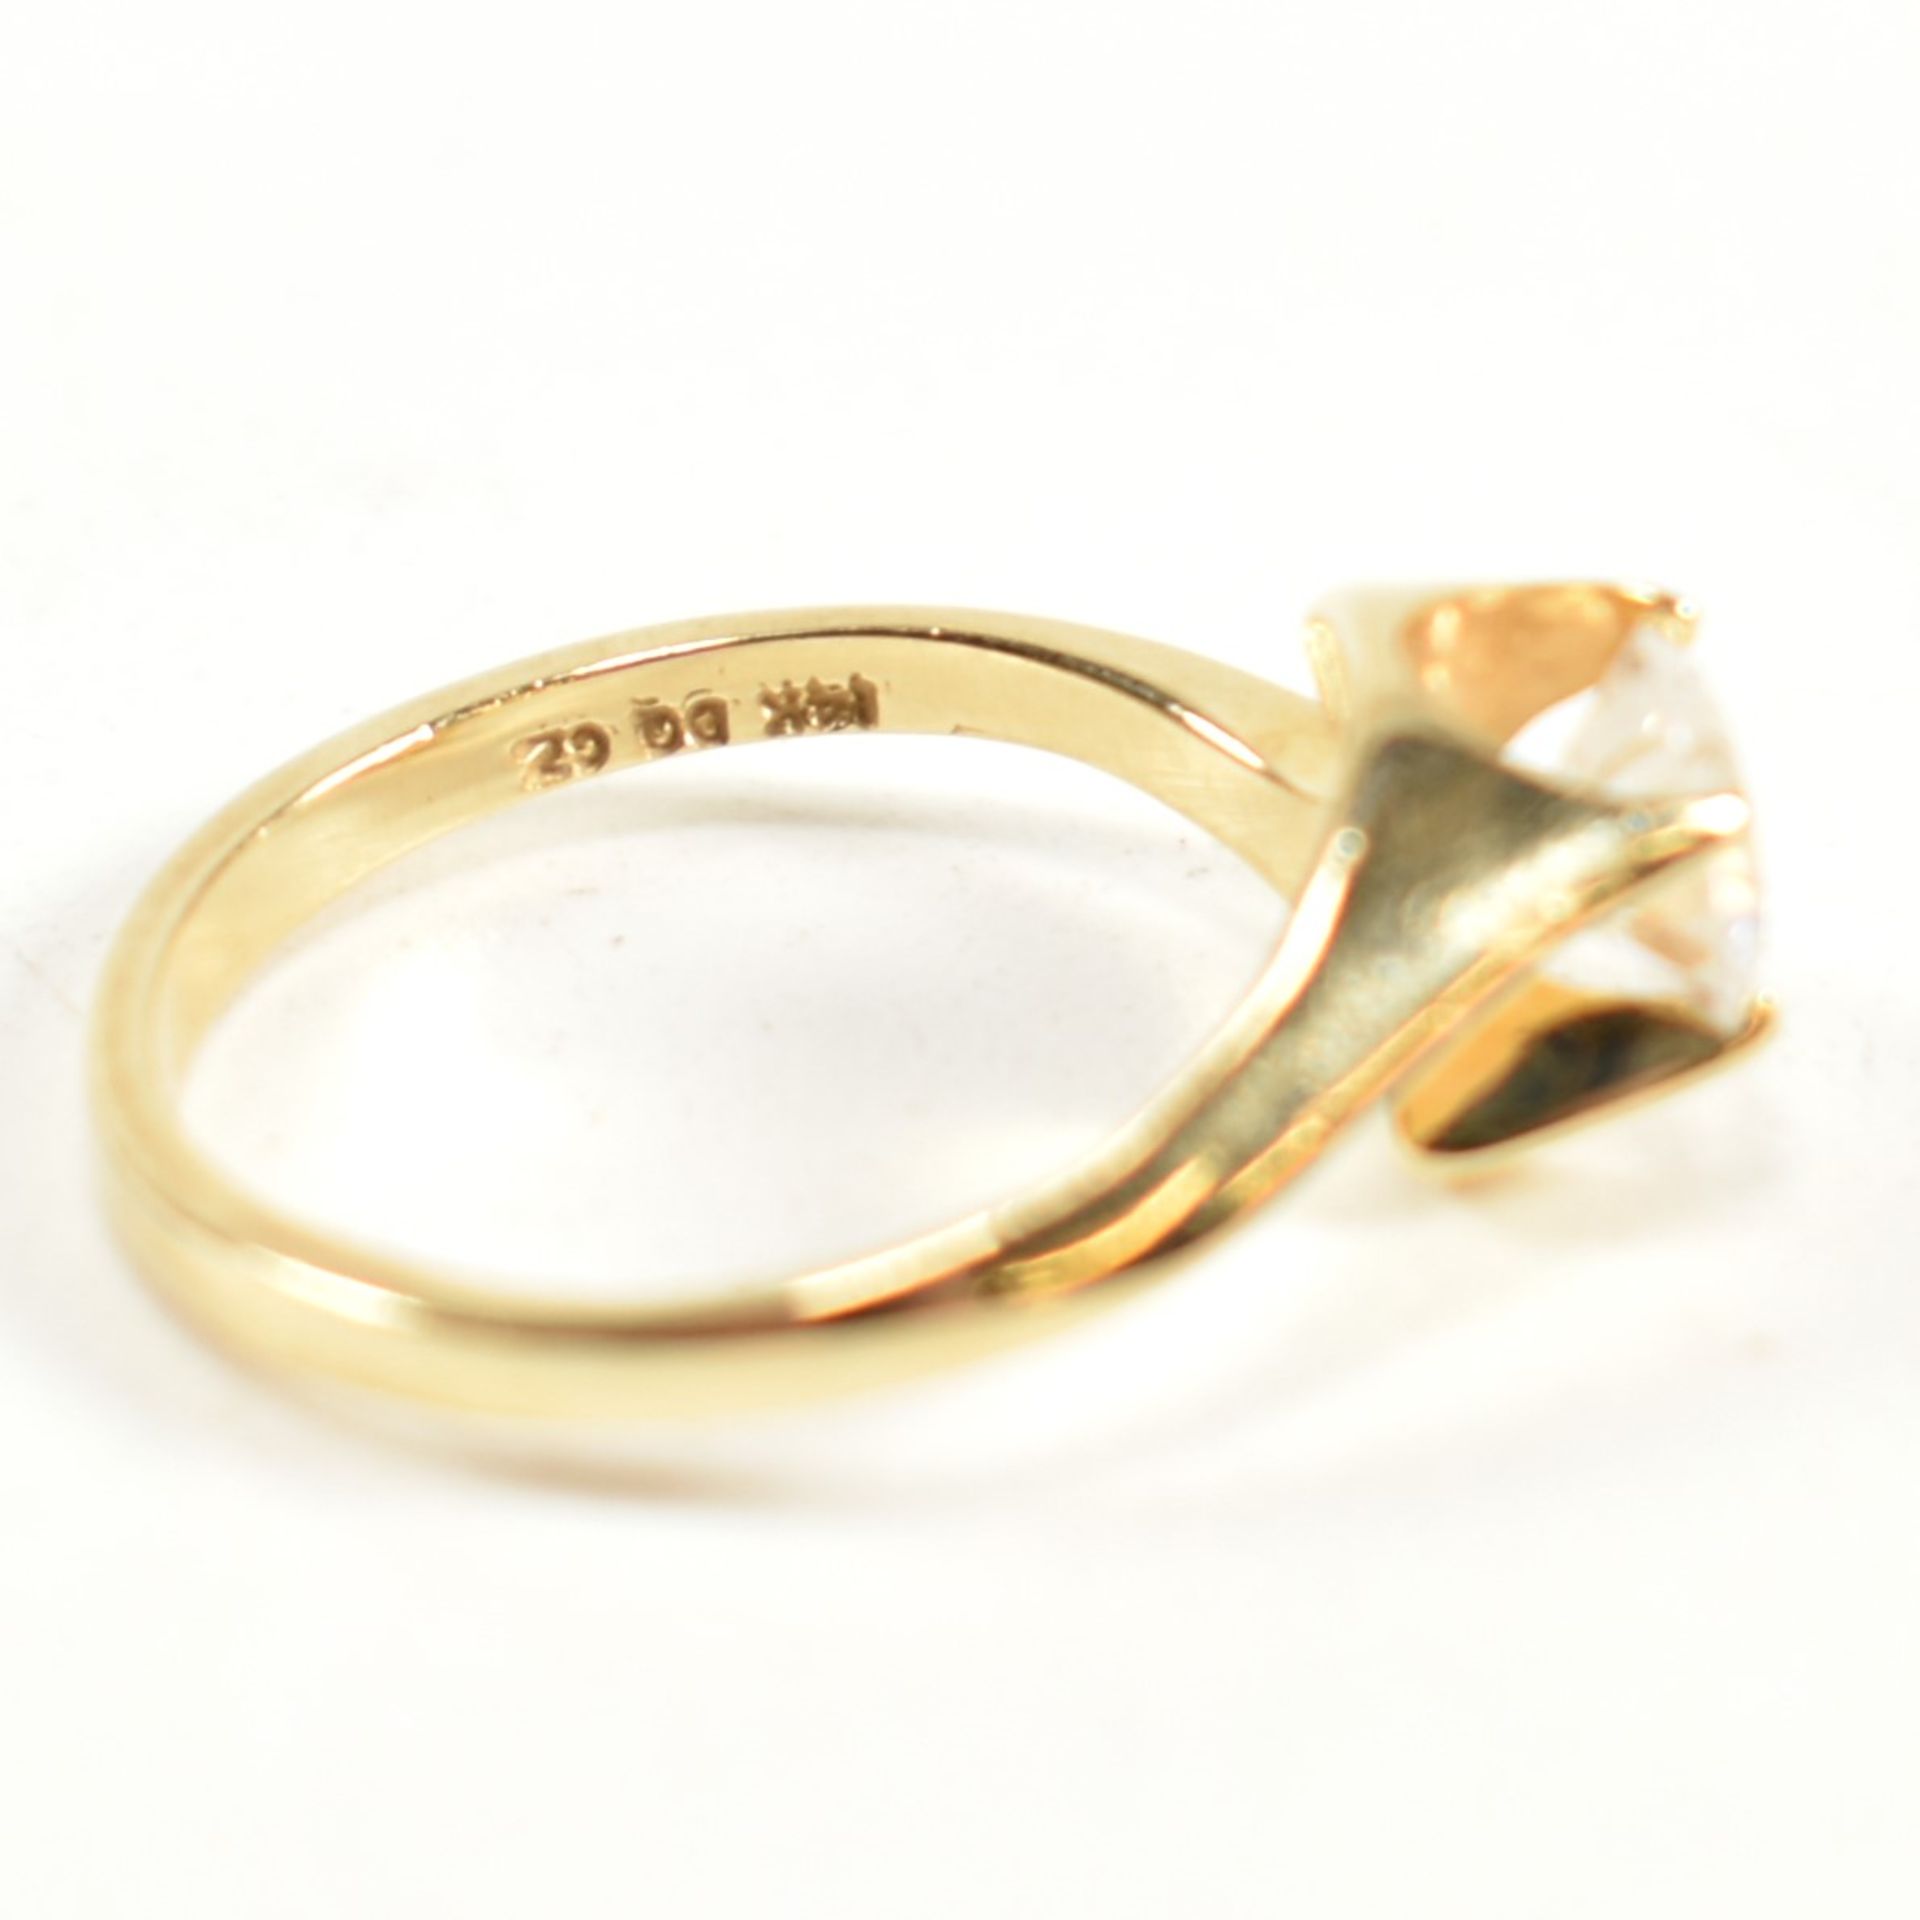 HALLMARKED 14CT GOLD & CZ CROSSOVER RING - Image 5 of 9